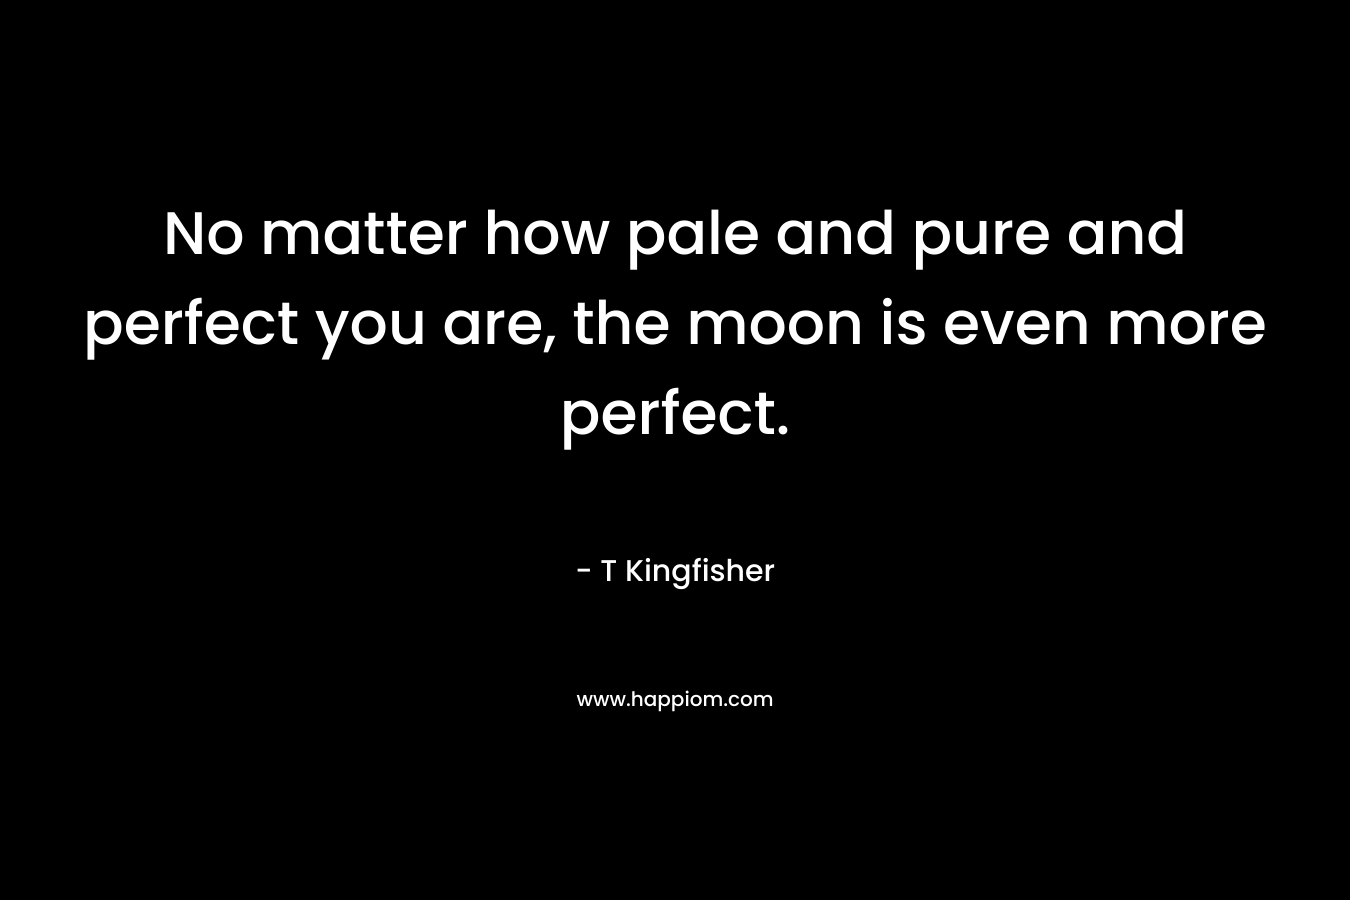 No matter how pale and pure and perfect you are, the moon is even more perfect. – T Kingfisher